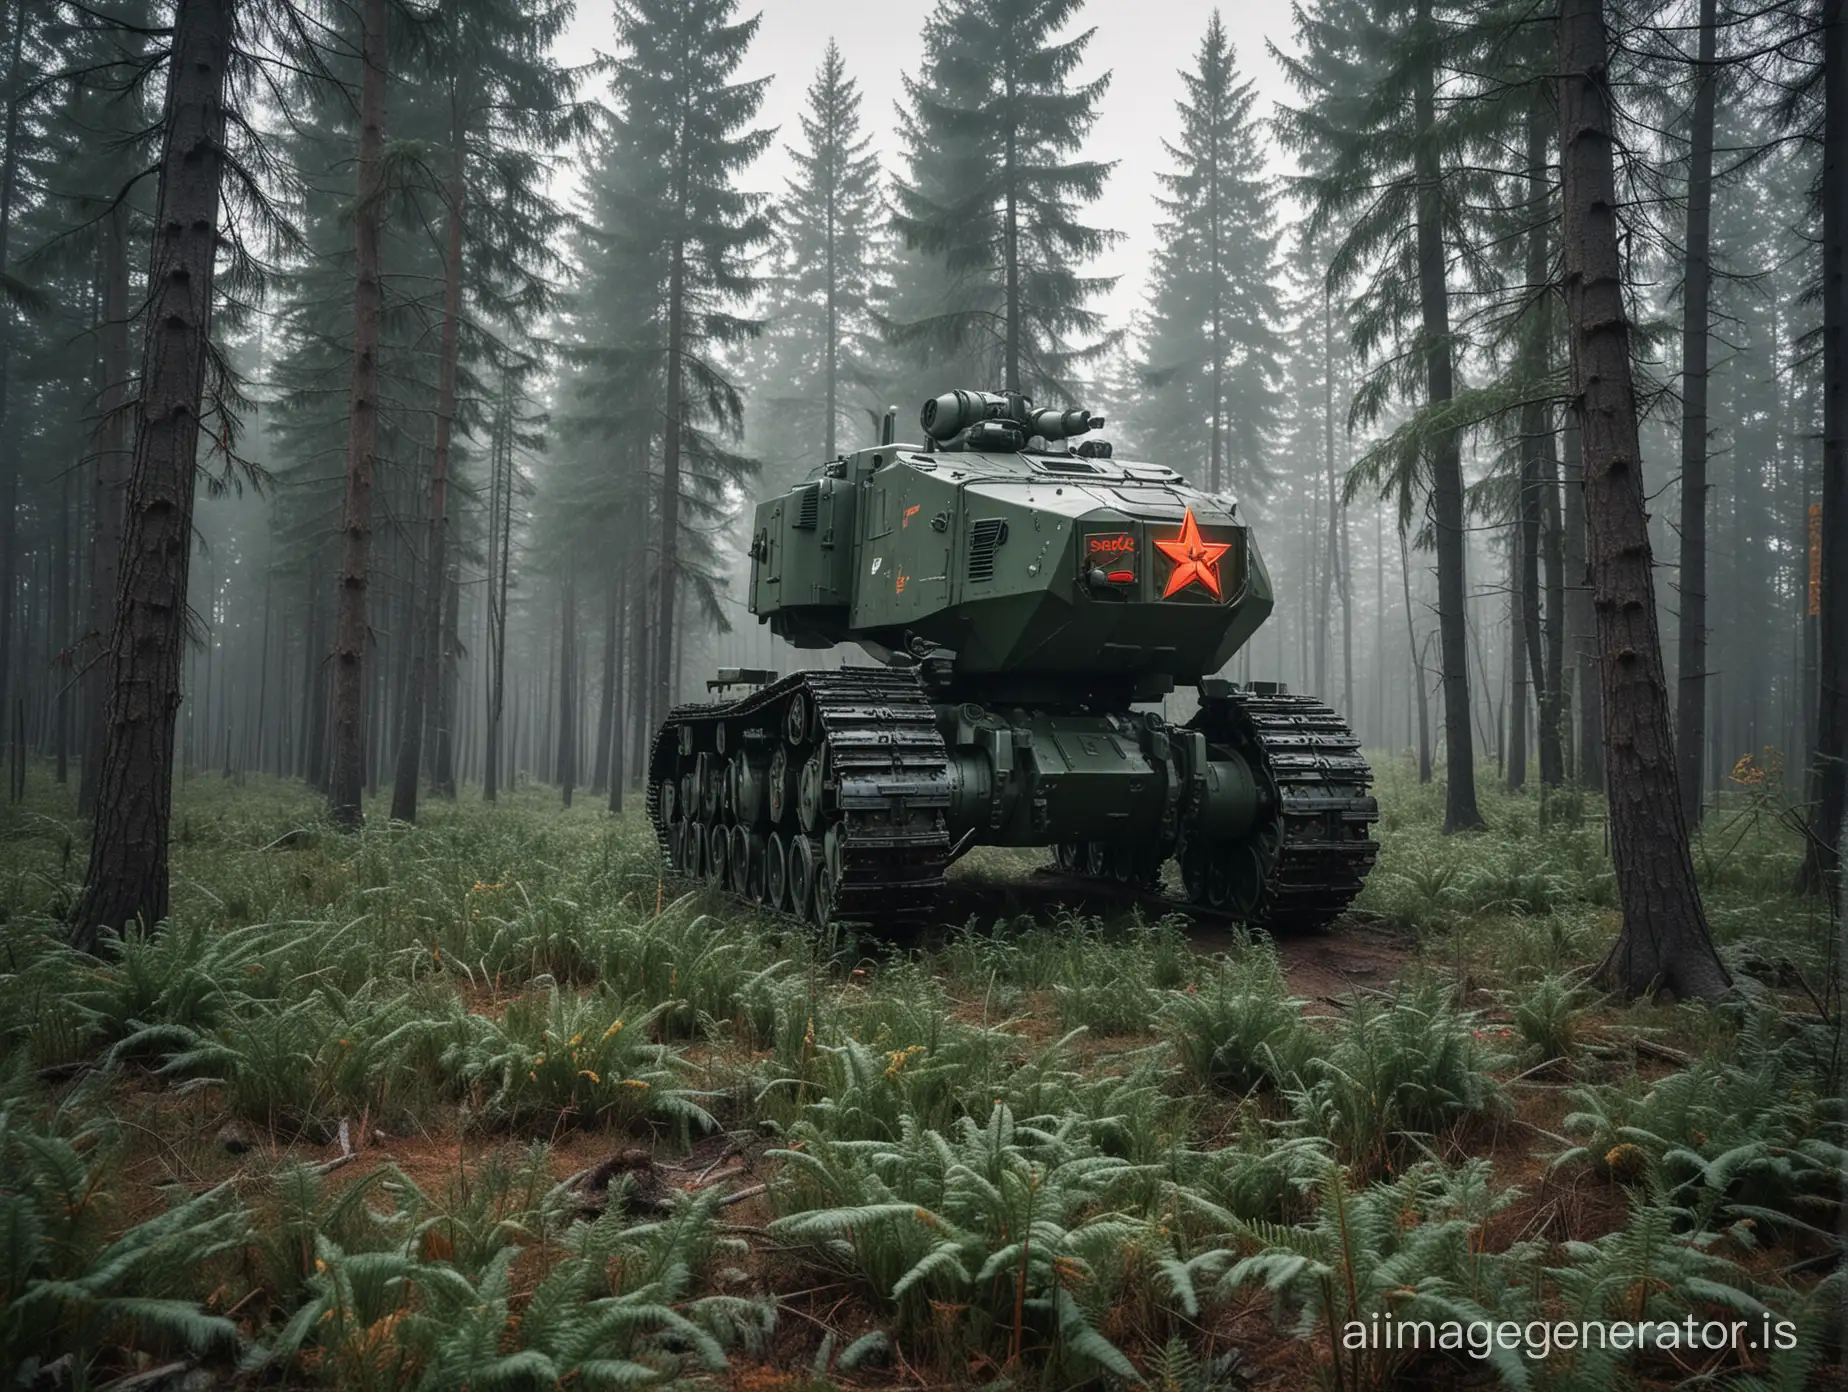 wide view, soviet research dark green MAZ mech on large caterpillars. the sixties of the 20th century. coniferous forest. cinematic shot. winter. ground level shot, epic, cinematic background, dramatic, atmospheric. dawn. large inscription on the body of the CCCP . star. hammer and sickle